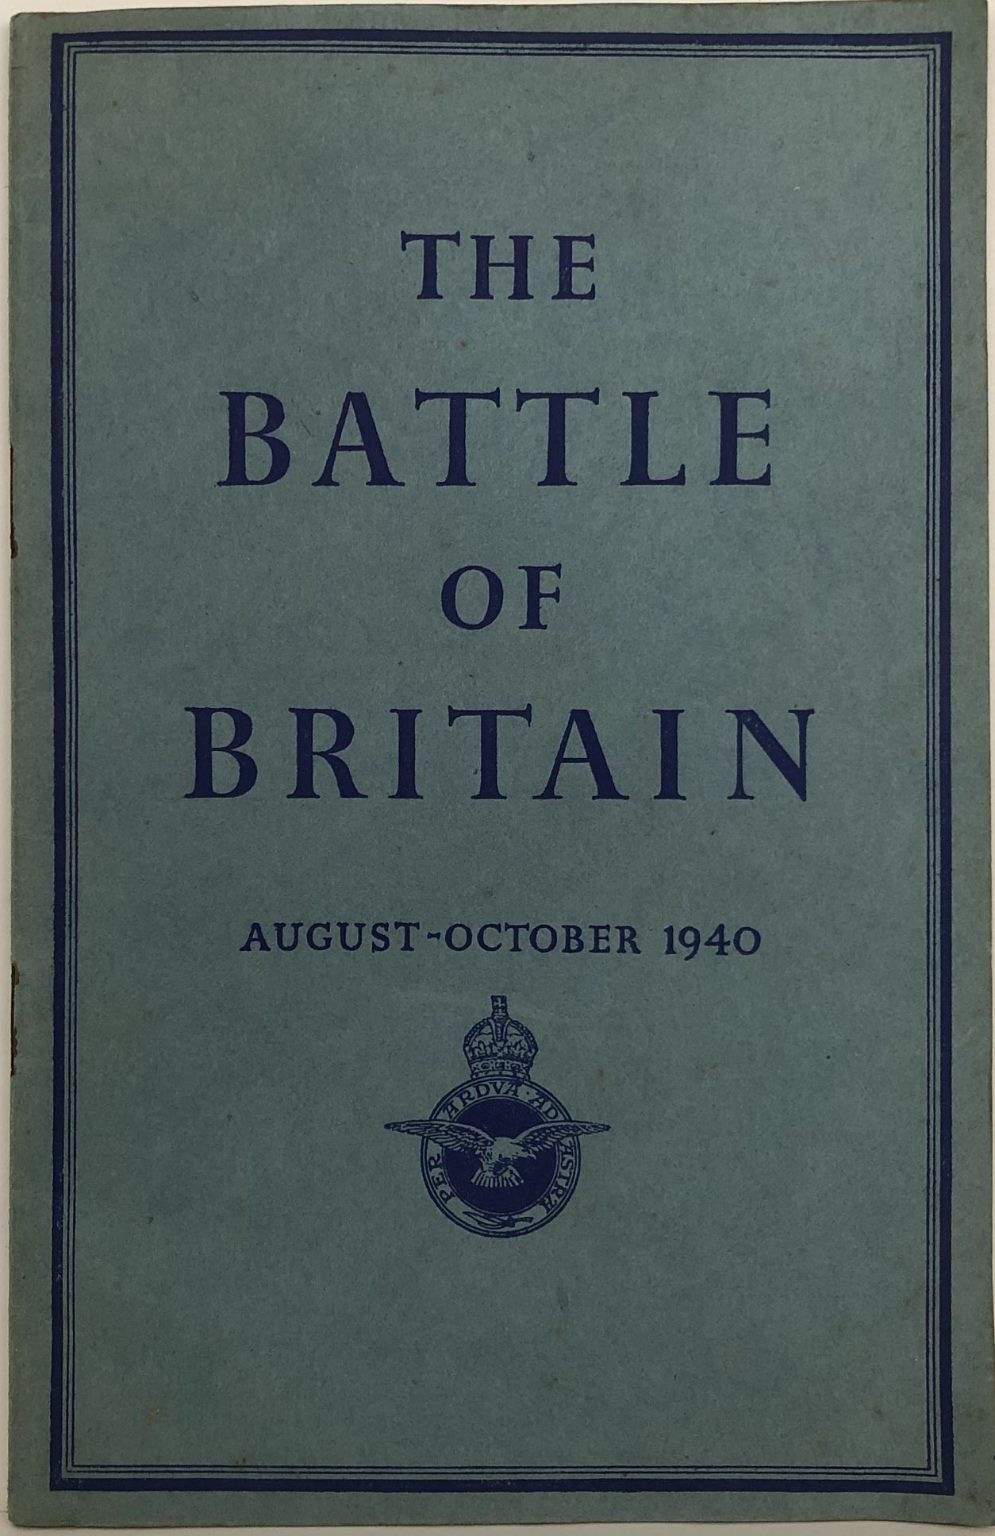 THE BATTLE OF BRITAIN 8th August - 31st October 1940